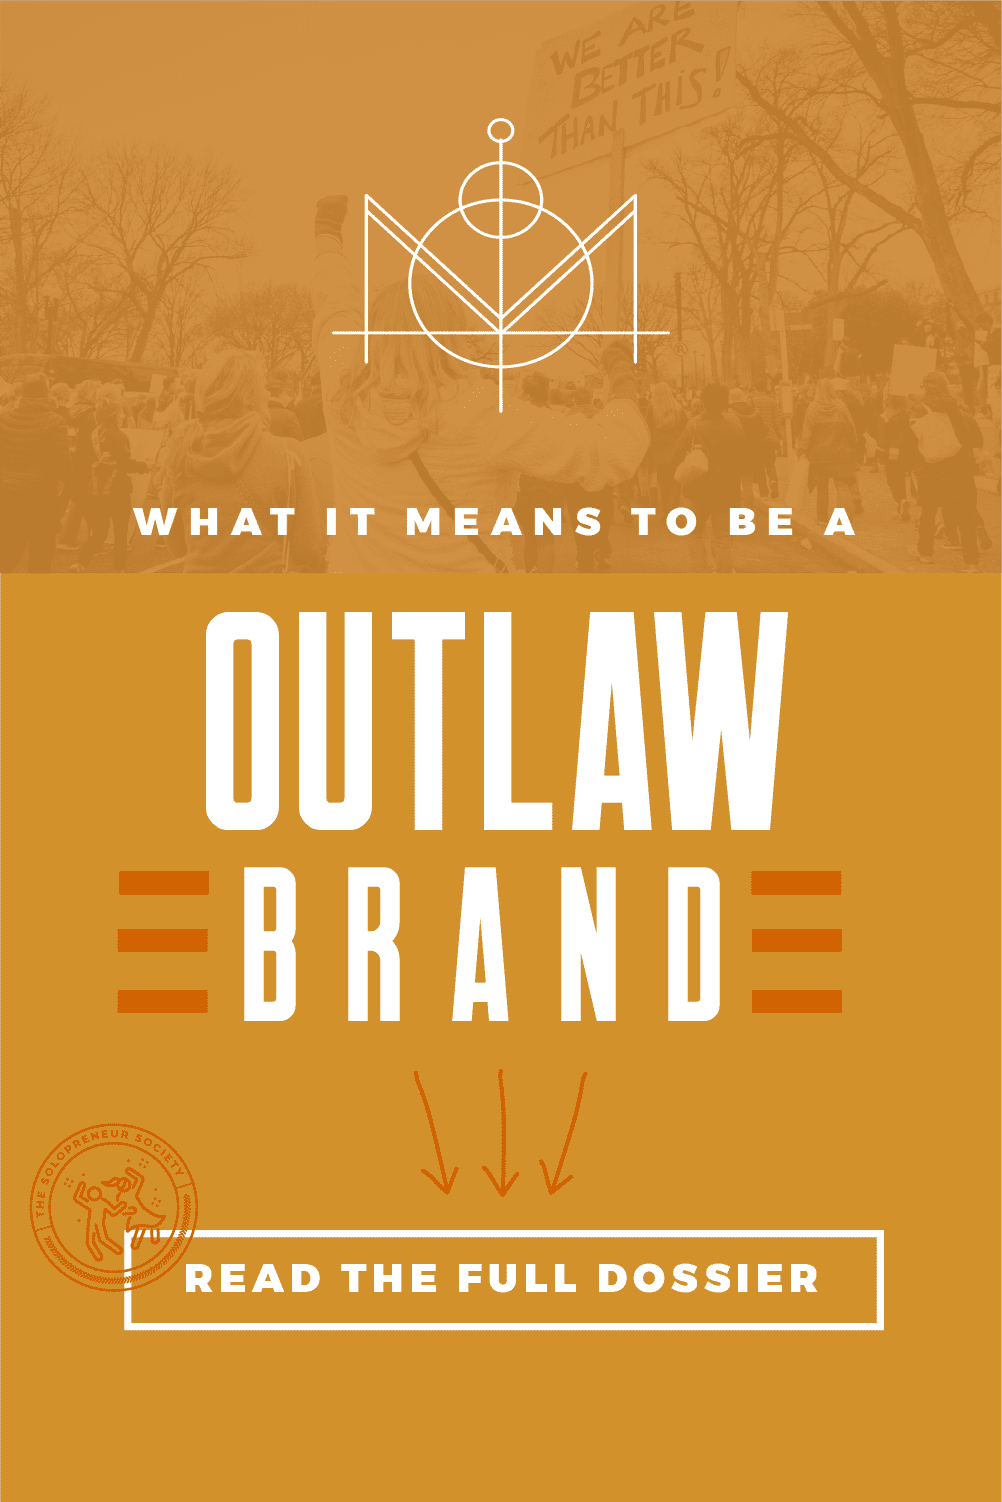 Outlaw Archetype Brand Personality